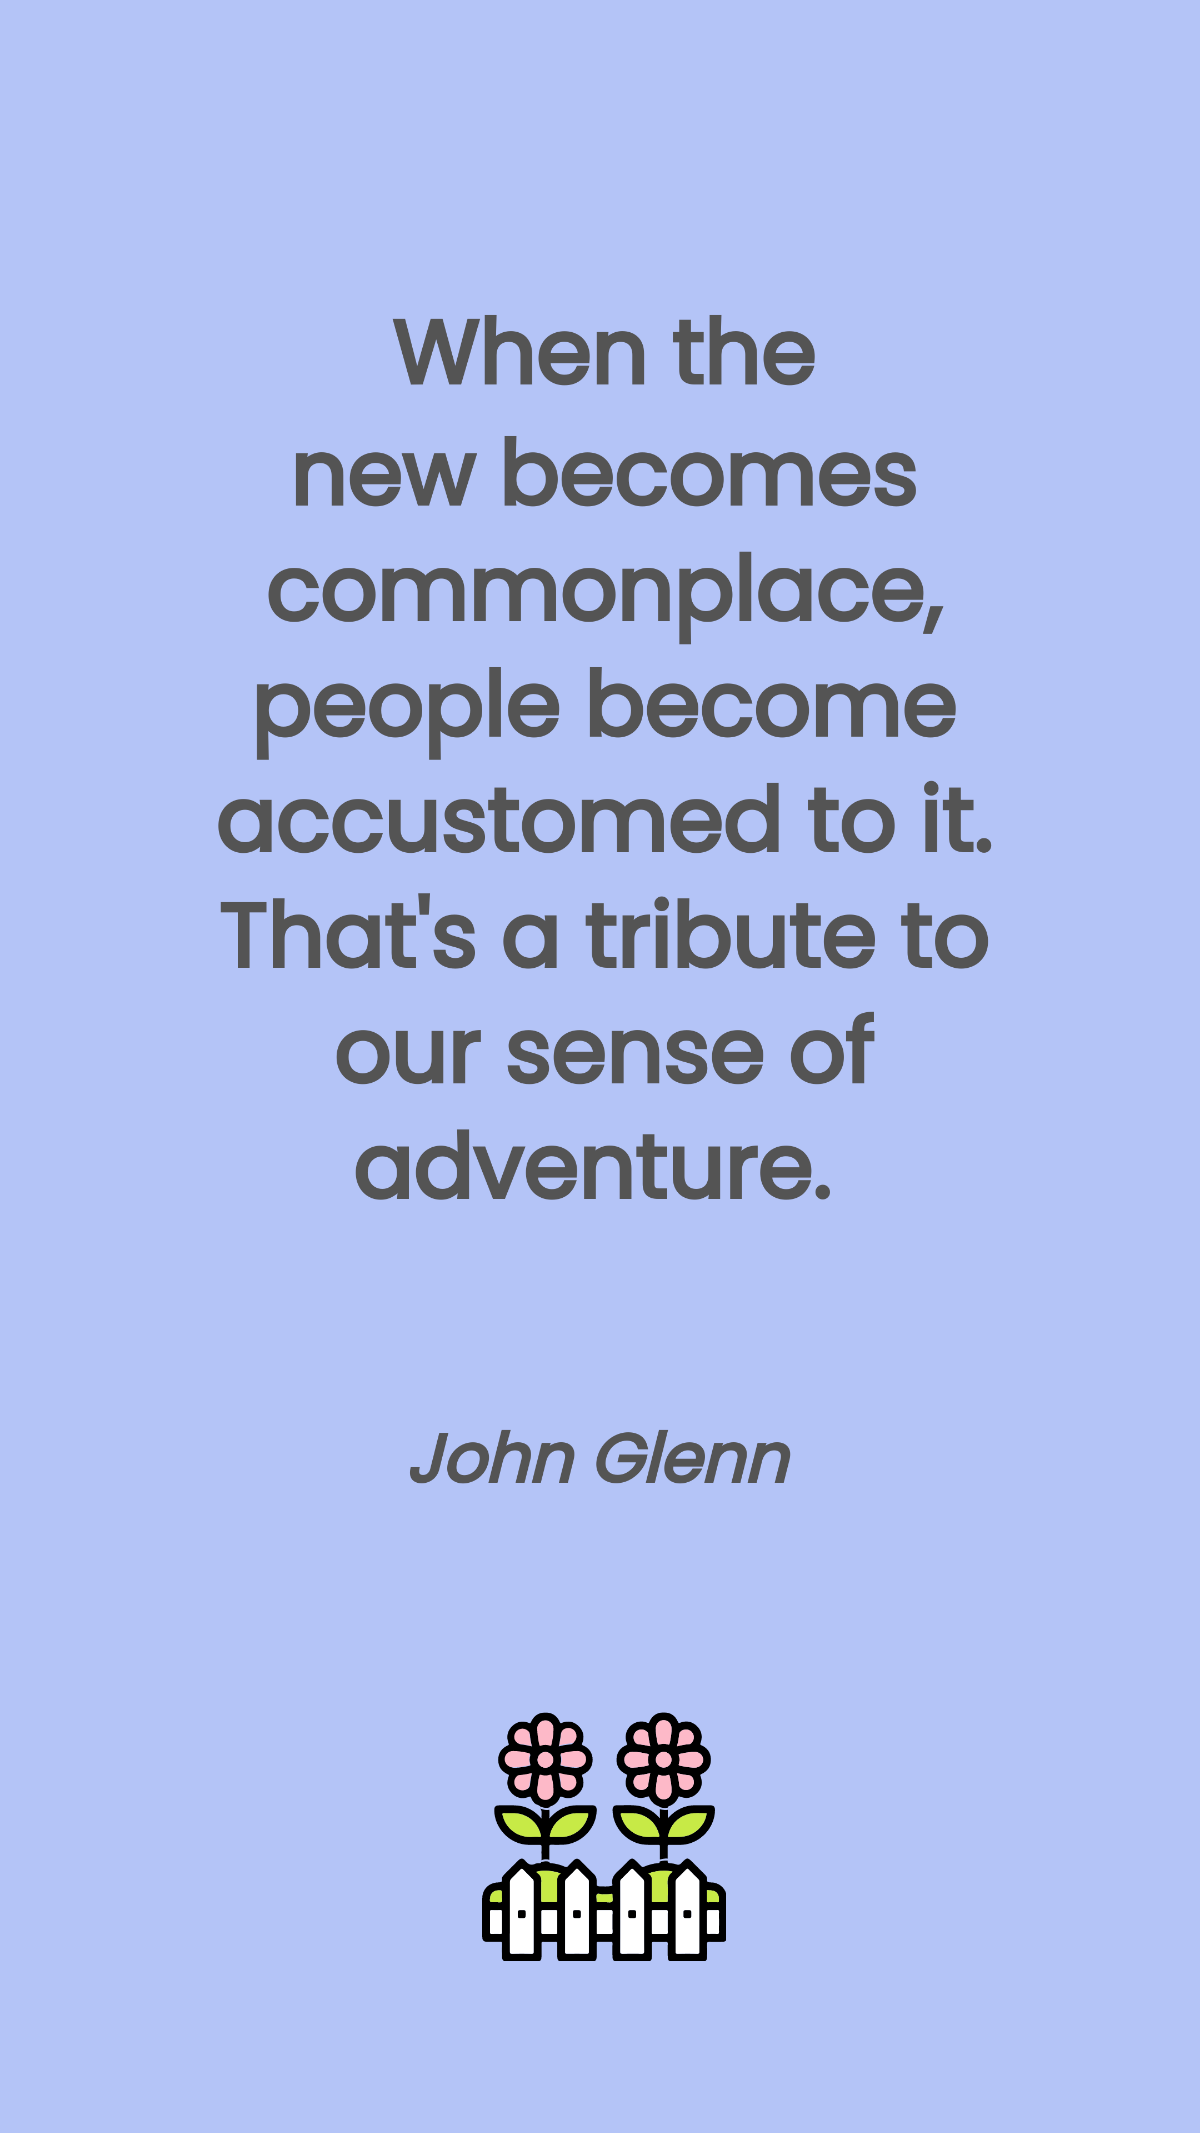 John Glenn - When the new becomes commonplace, people become accustomed to it. That's a tribute to our sense of adventure. Template